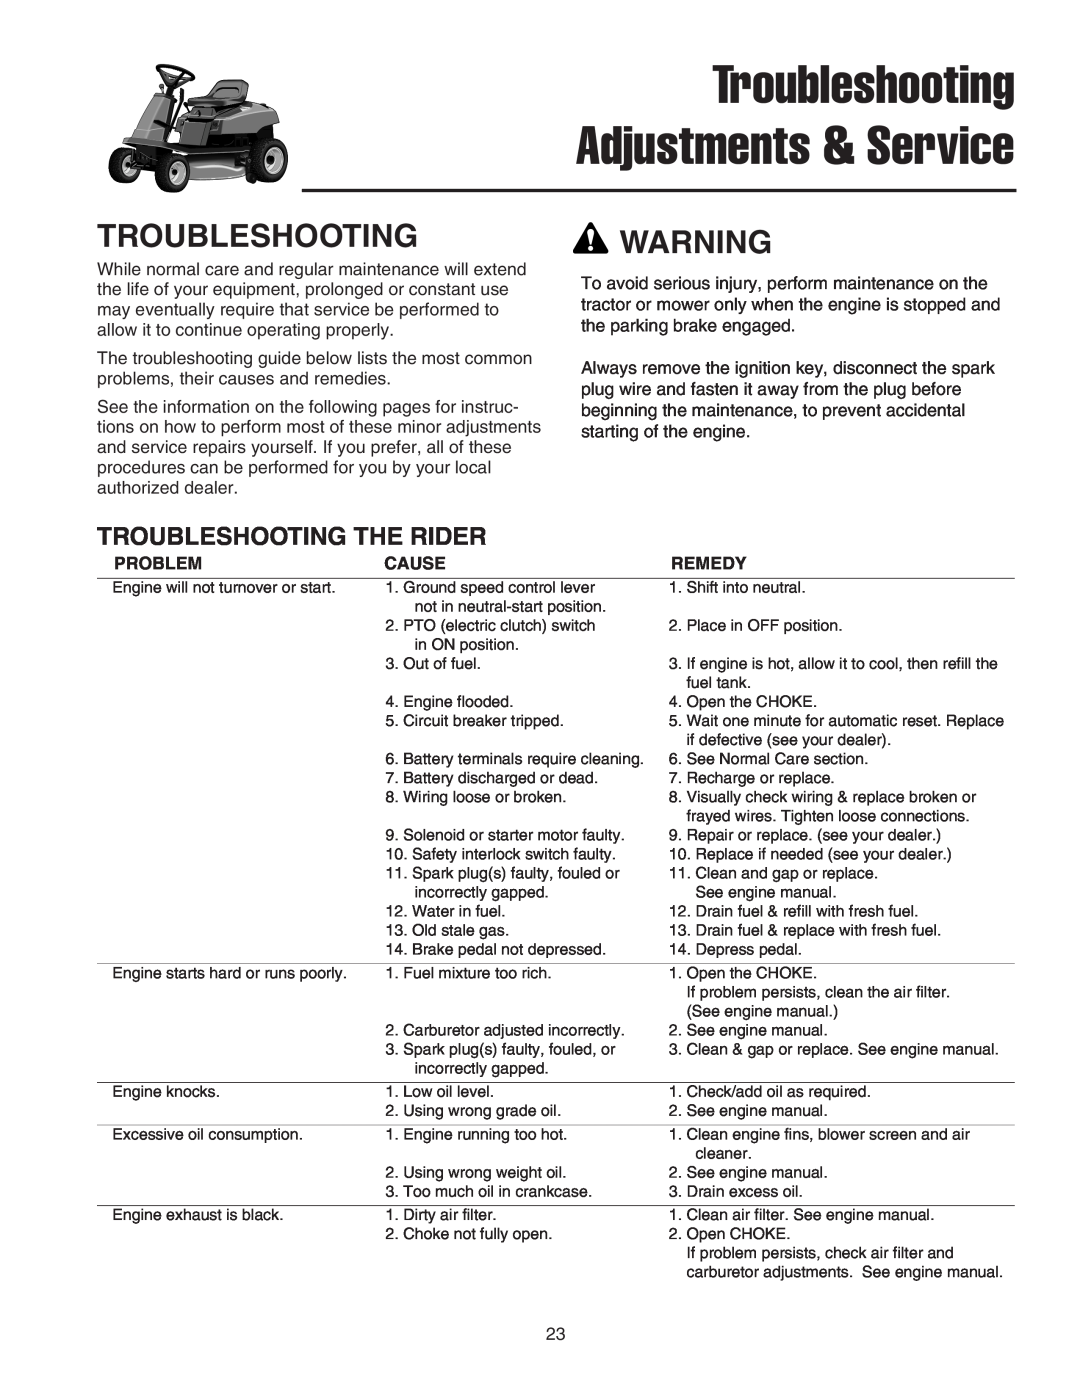 Snapper 400 Series manual Troubleshooting Adjustments & Service, Troubleshooting Warning, Troubleshooting The Rider 